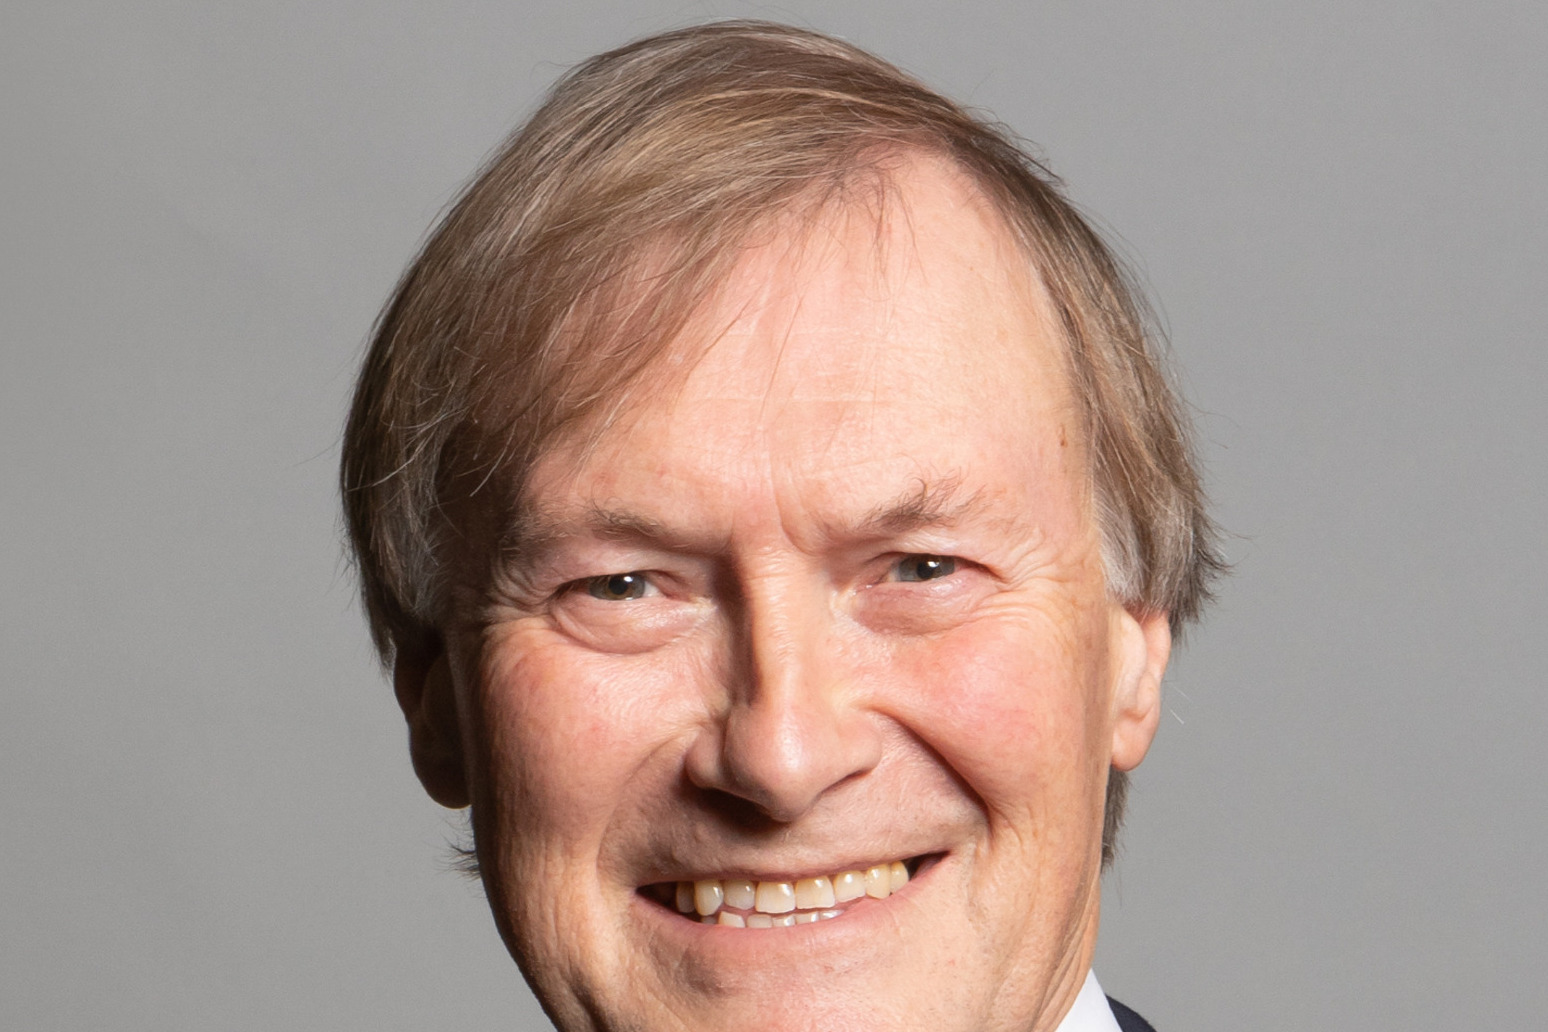 Inquest opened into death of MP Sir David Amess 